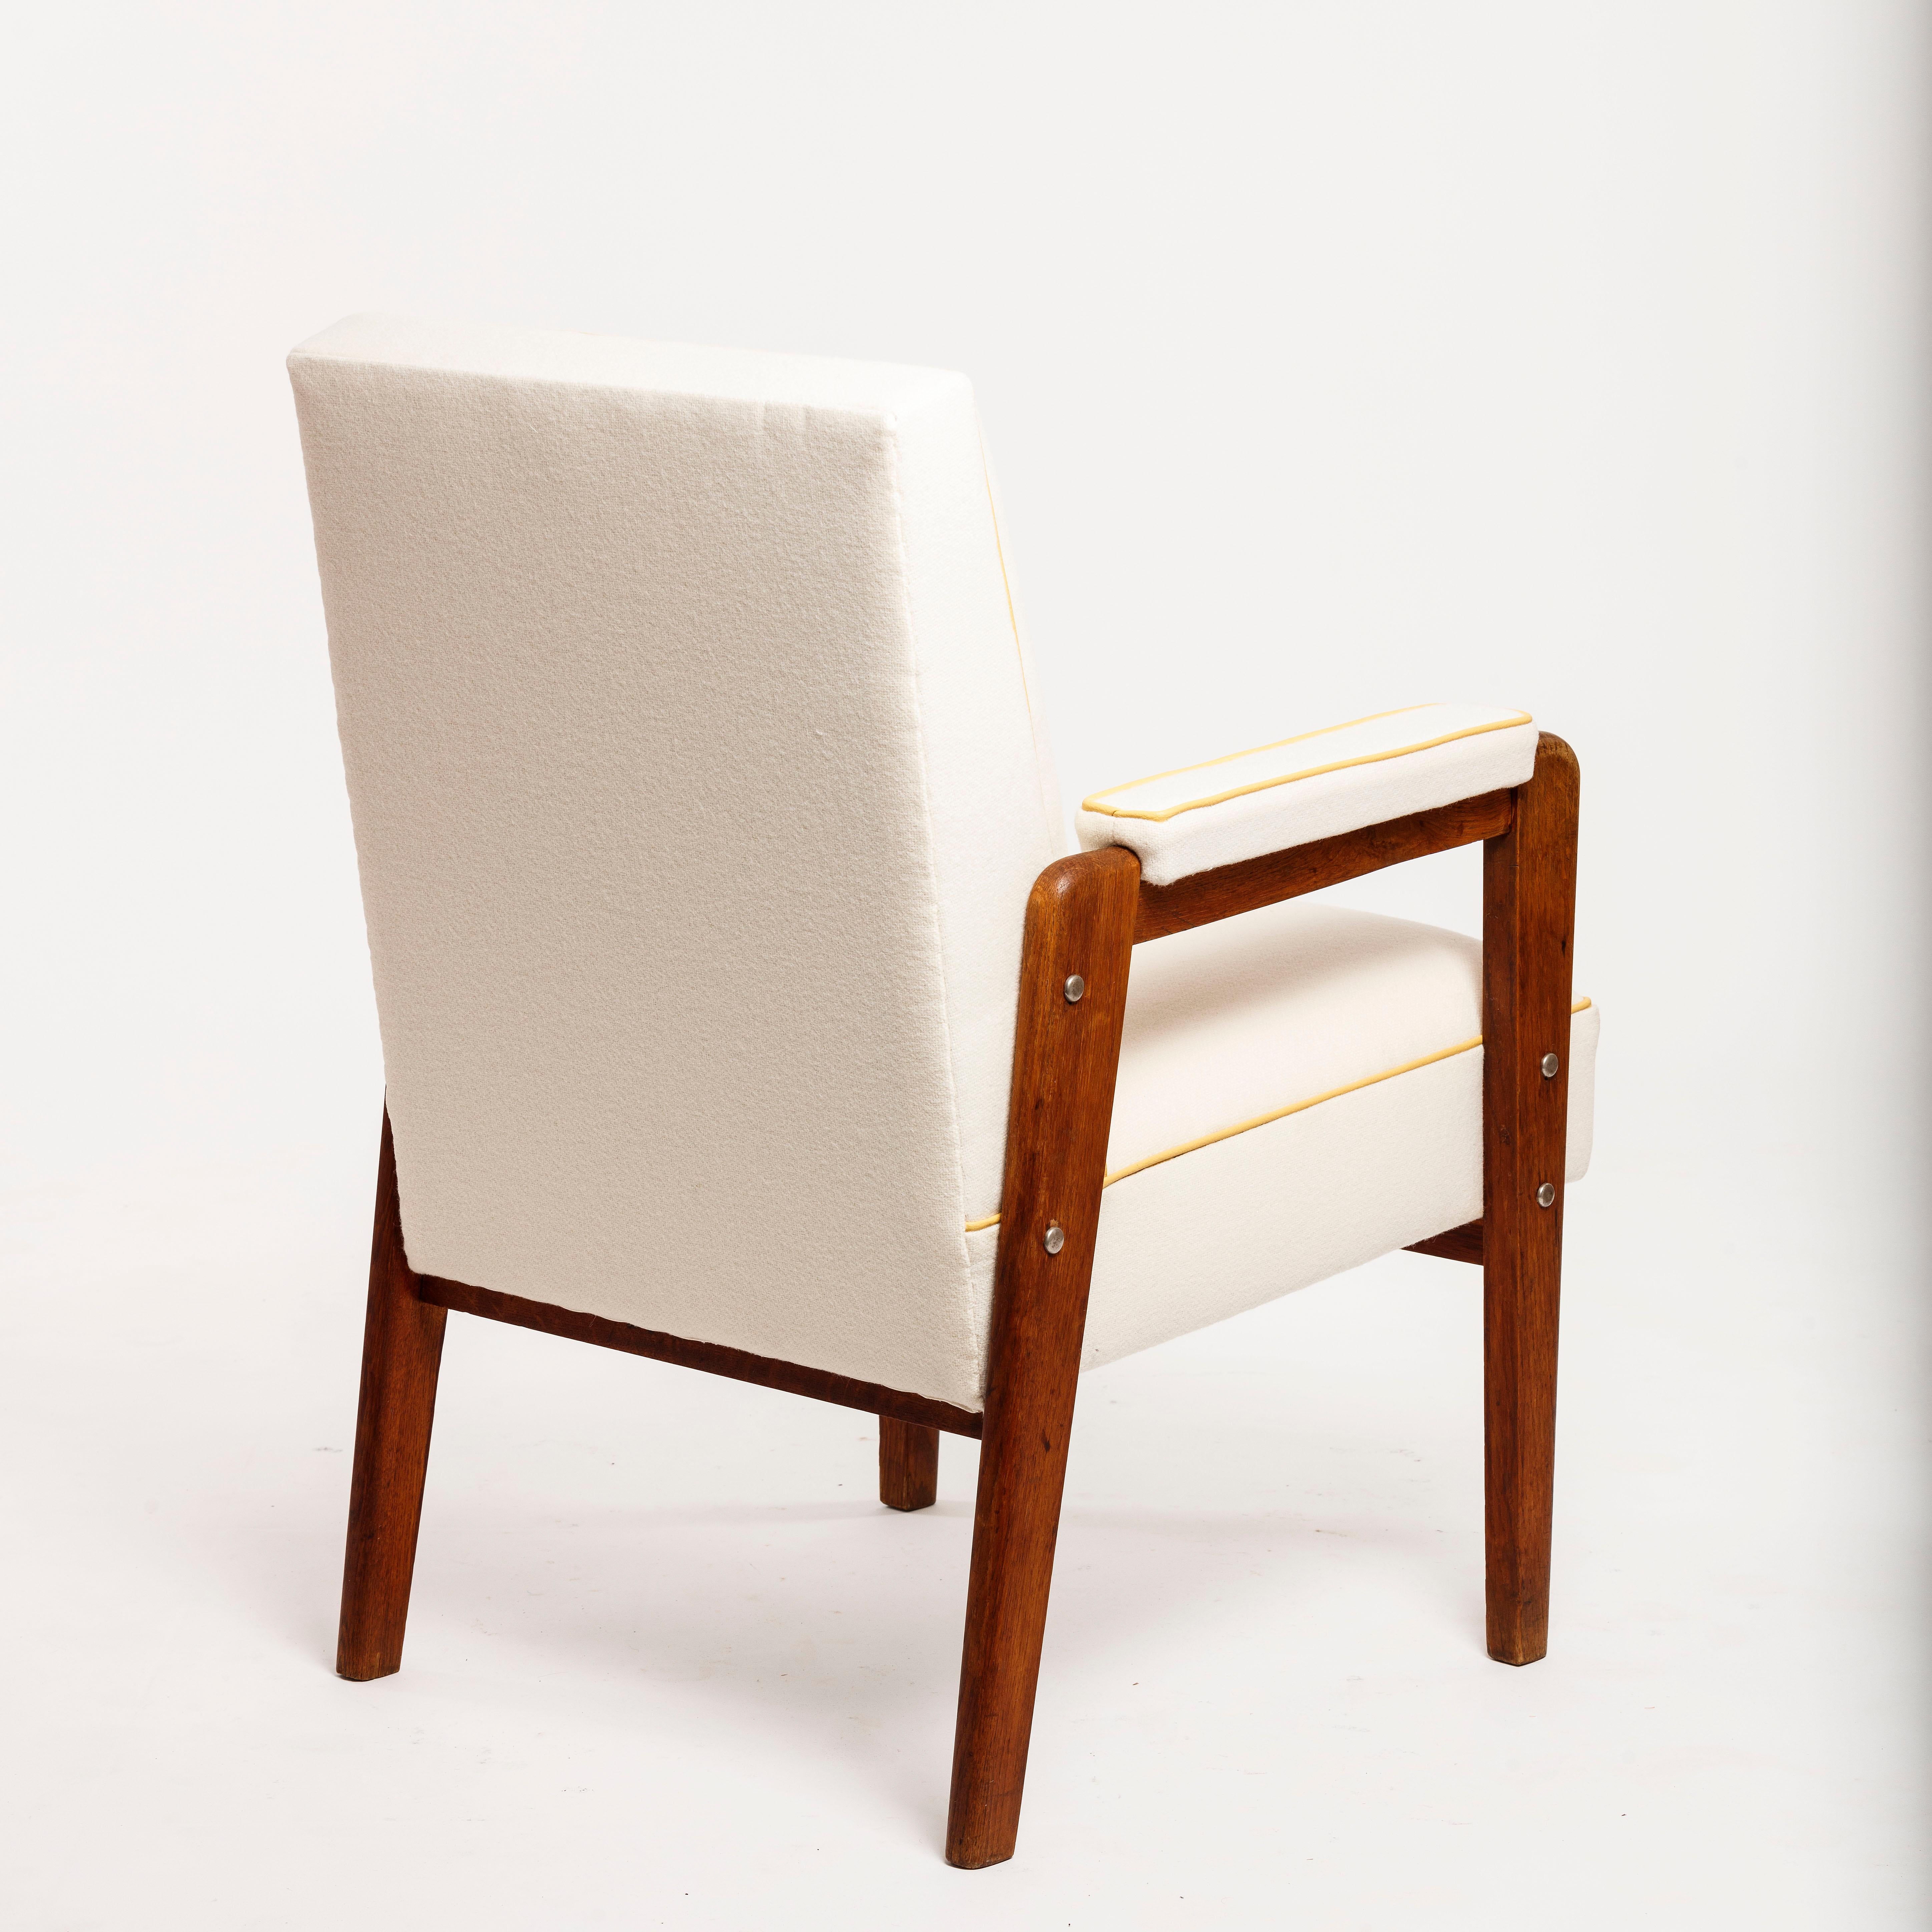 French Marcel Gascoin Armchair Created in 1950 for the Cité Universitaire Antony France For Sale